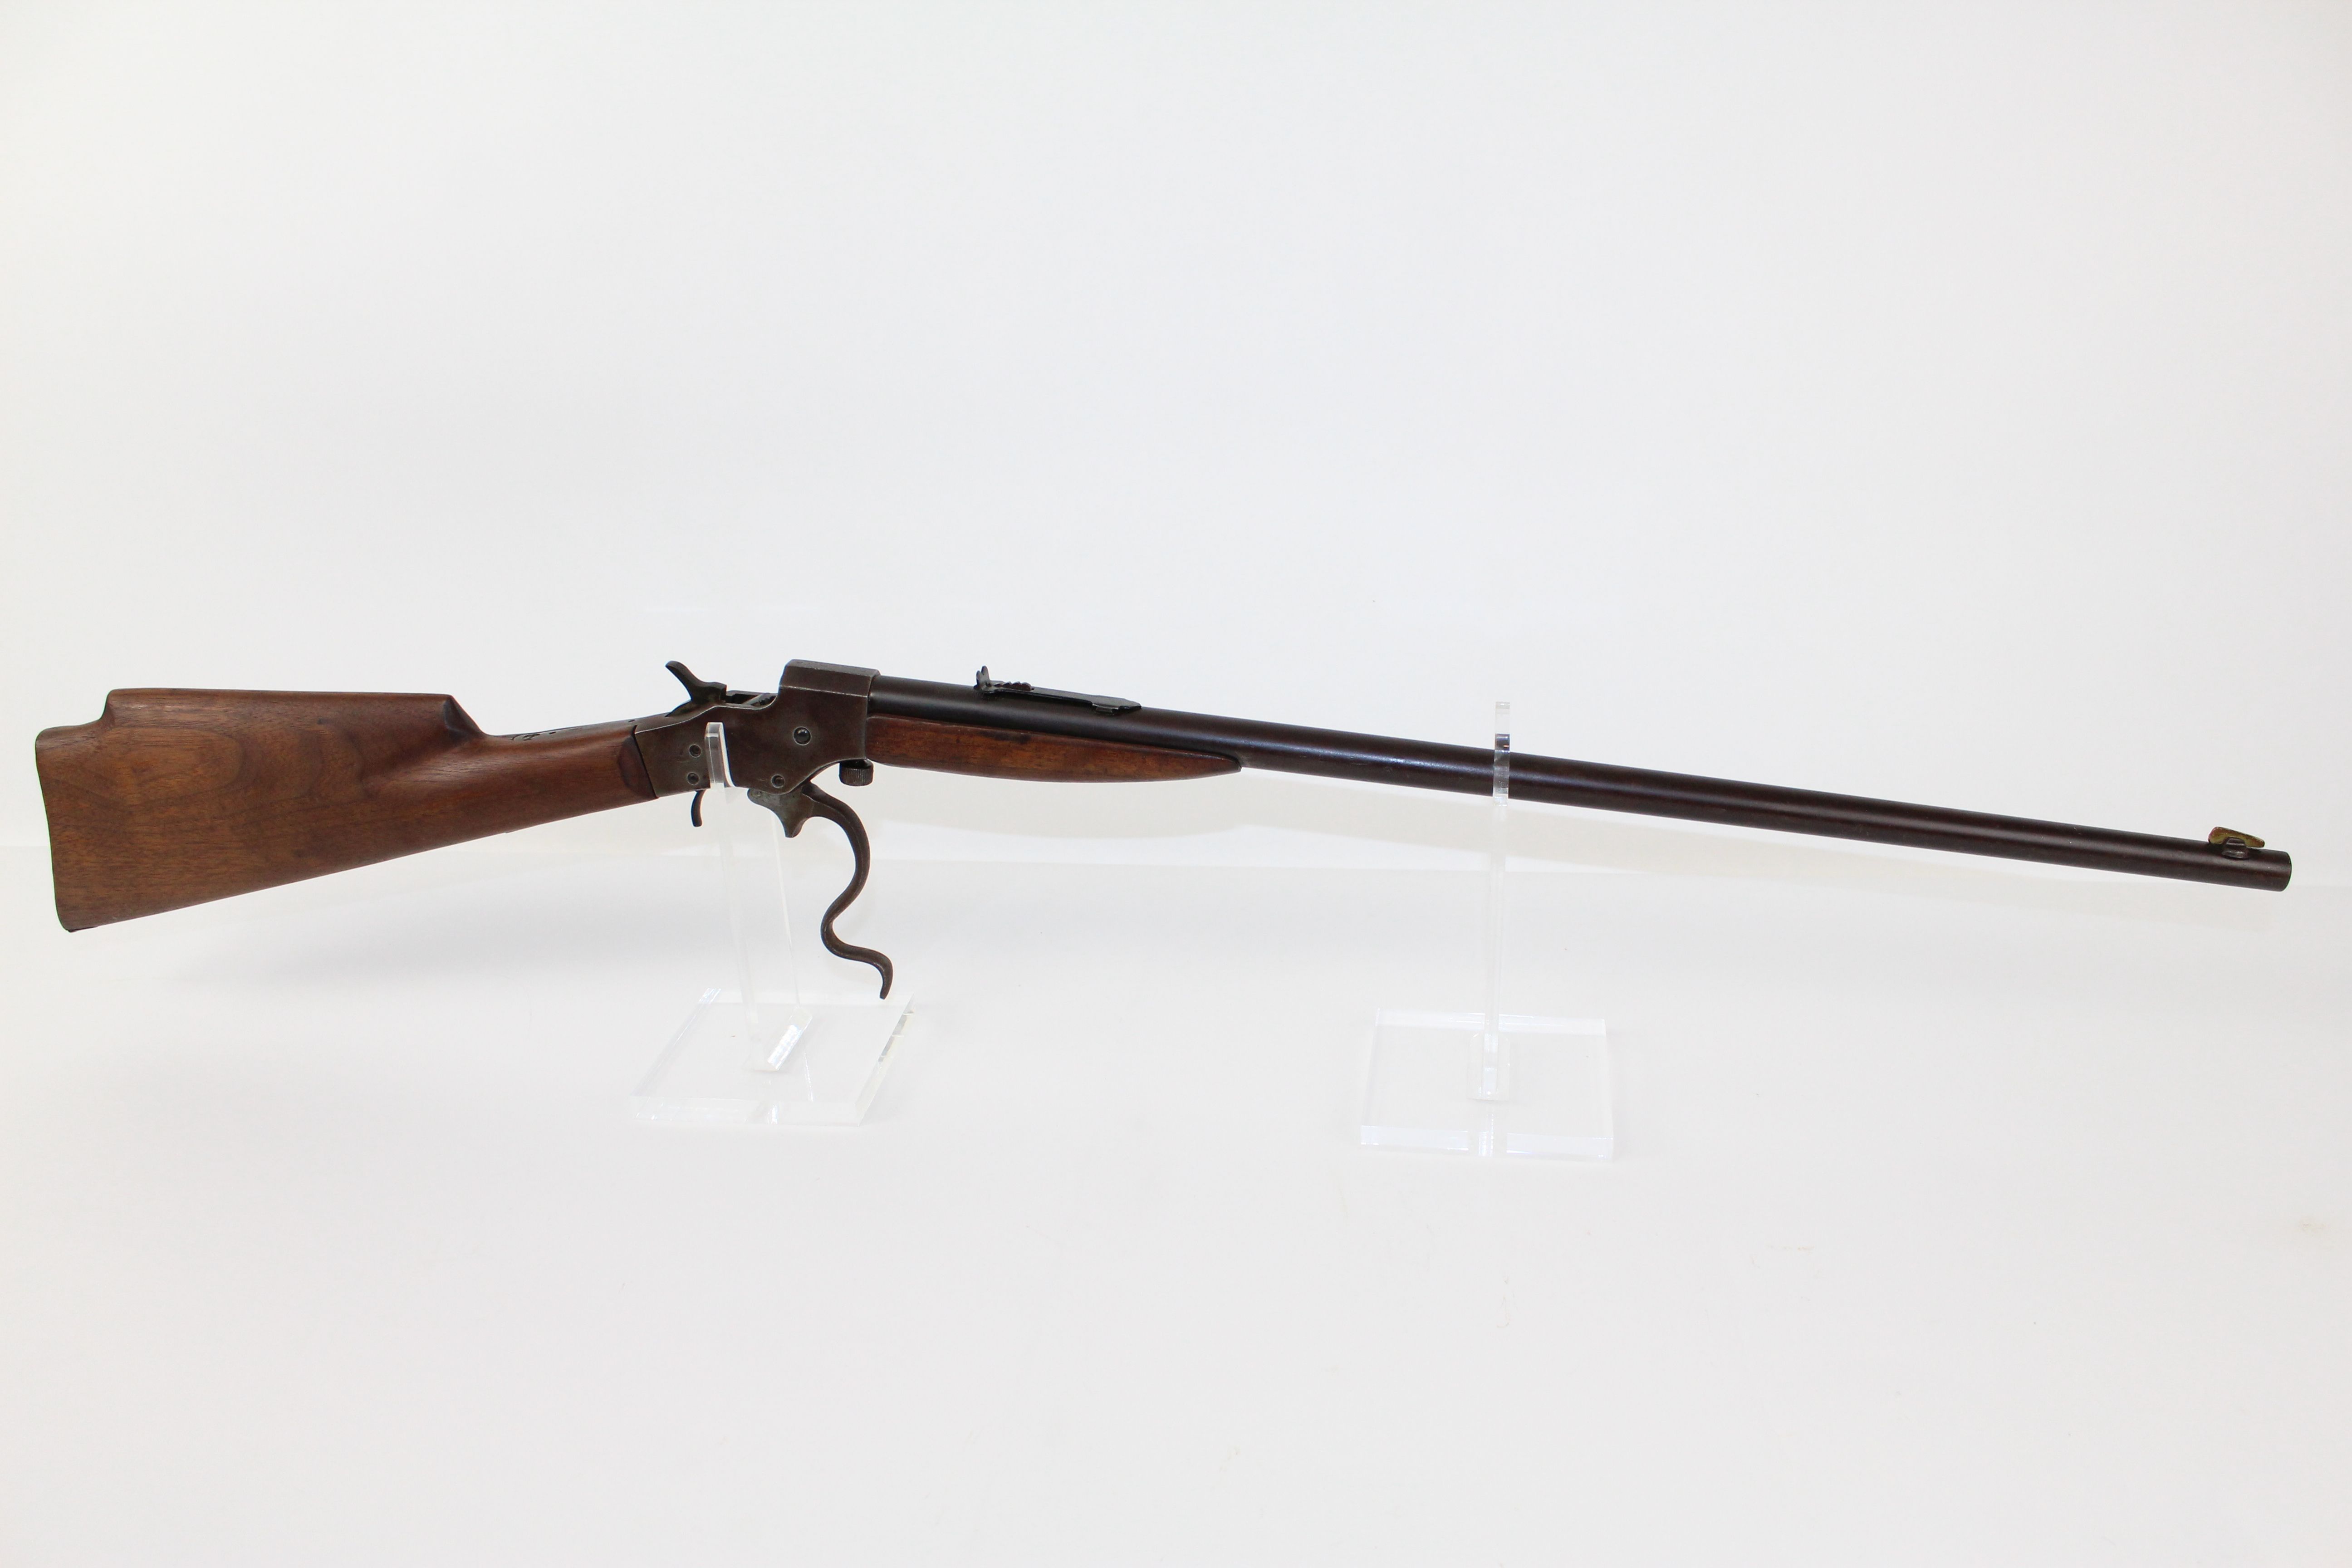 Rare Rochester Historical Society rifle fetches record $306,000 at auction, News